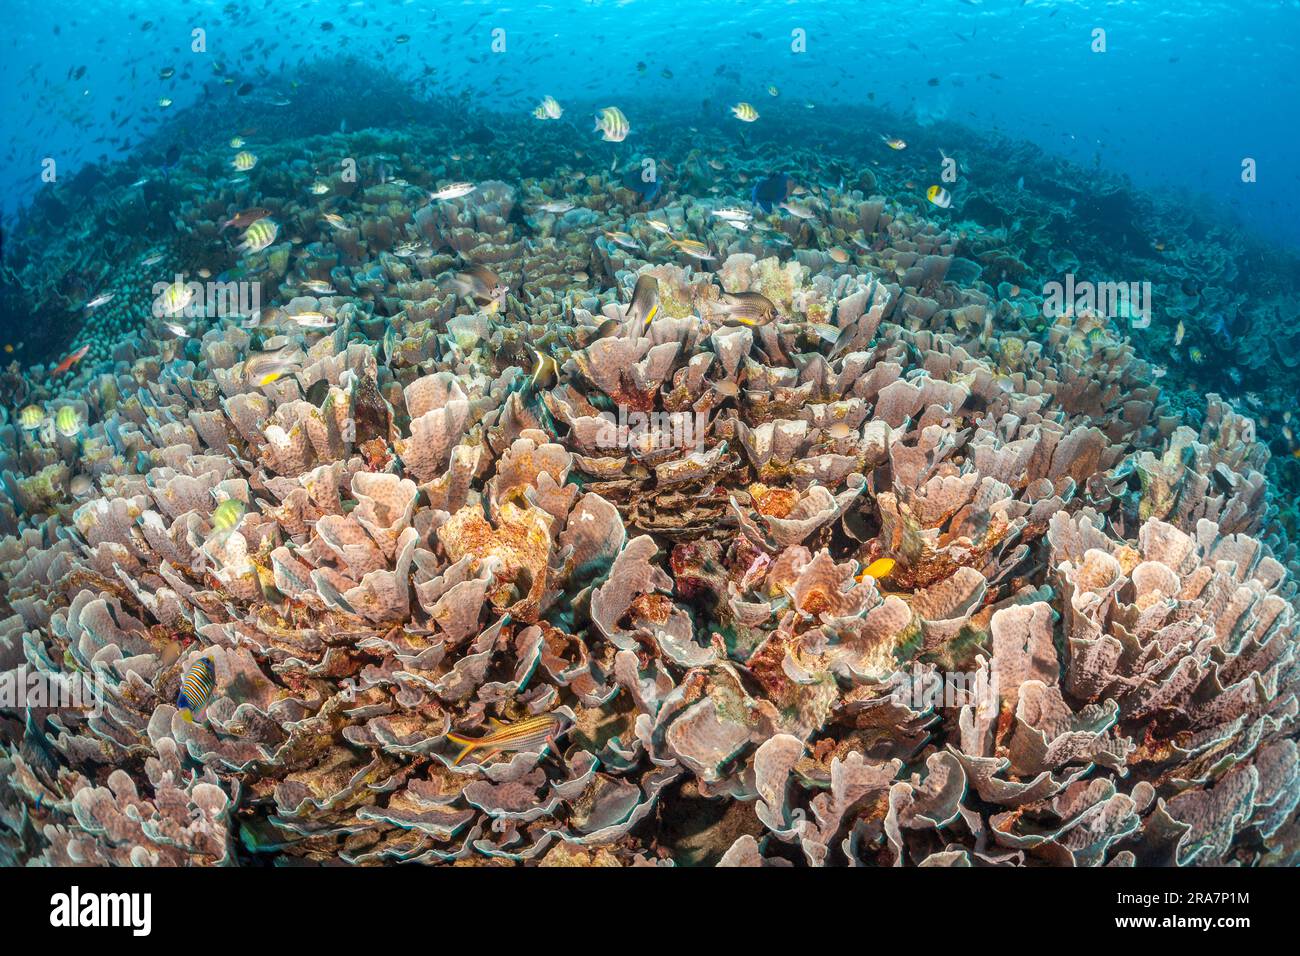 A reef scene of schooling fish over cabbage coral, Turbinaria sp. Indonesia. Stock Photo